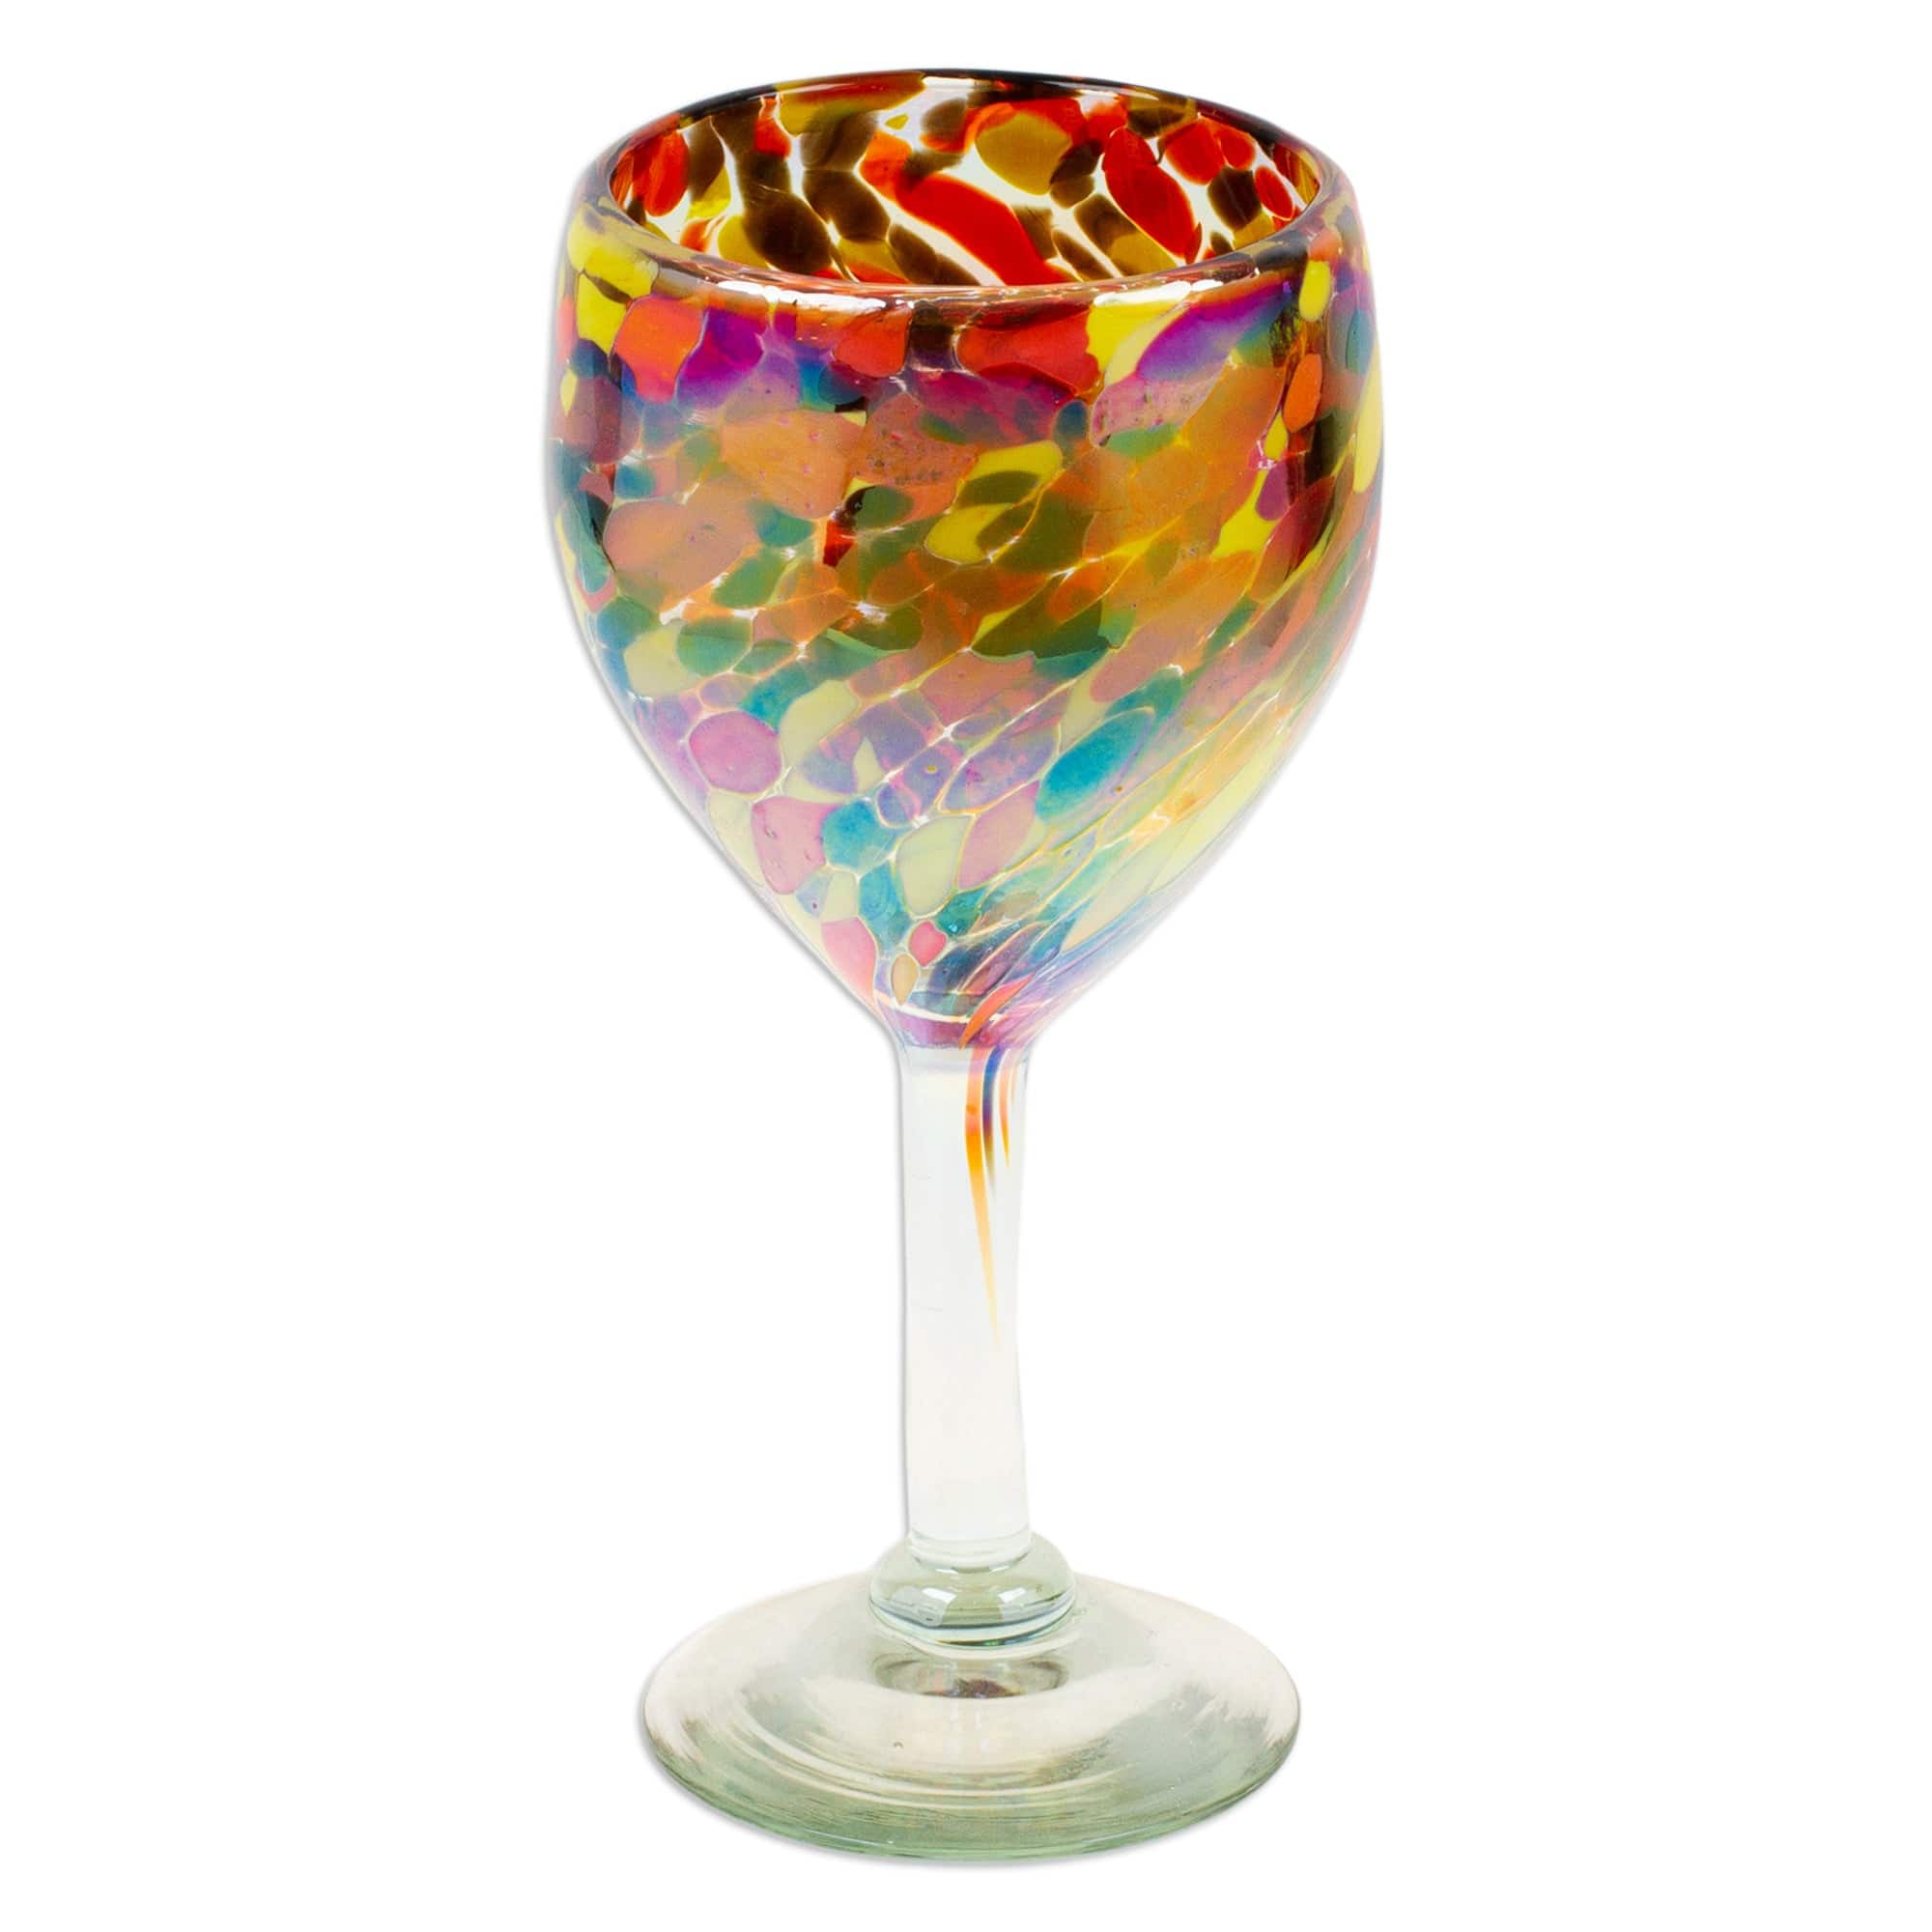 Set of 4 Colorful Wine Glasses Handblown from Recycled Glass - Bright –  GlobeIn